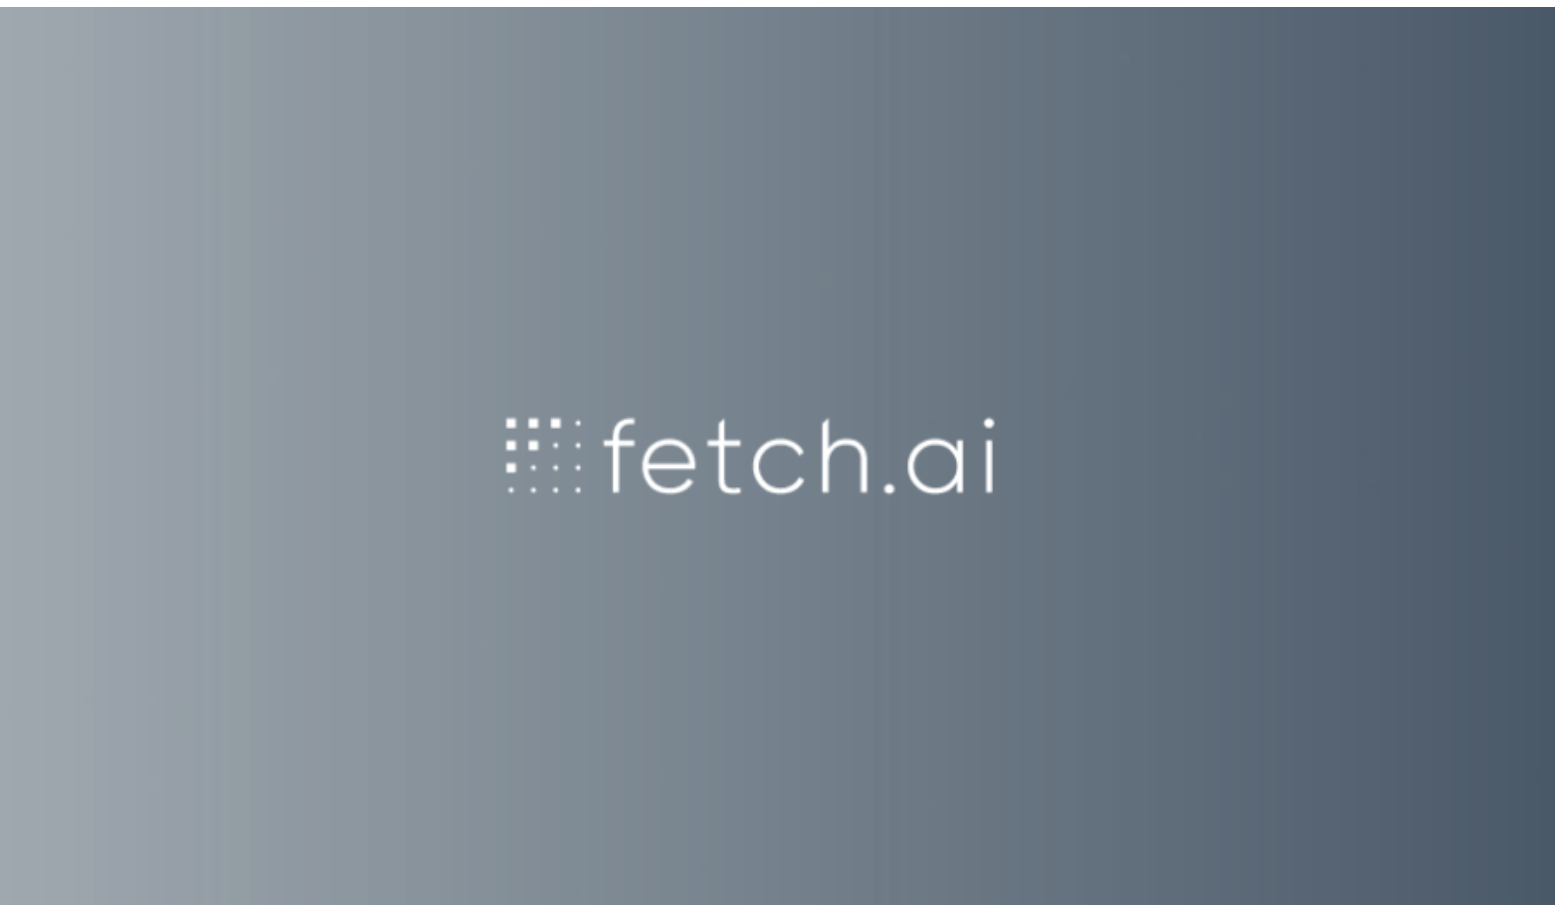 Fetch.ai (FET) Price Prediction: An Imminent Crash? Is It Time To Look At Wall Street Memes Instead?